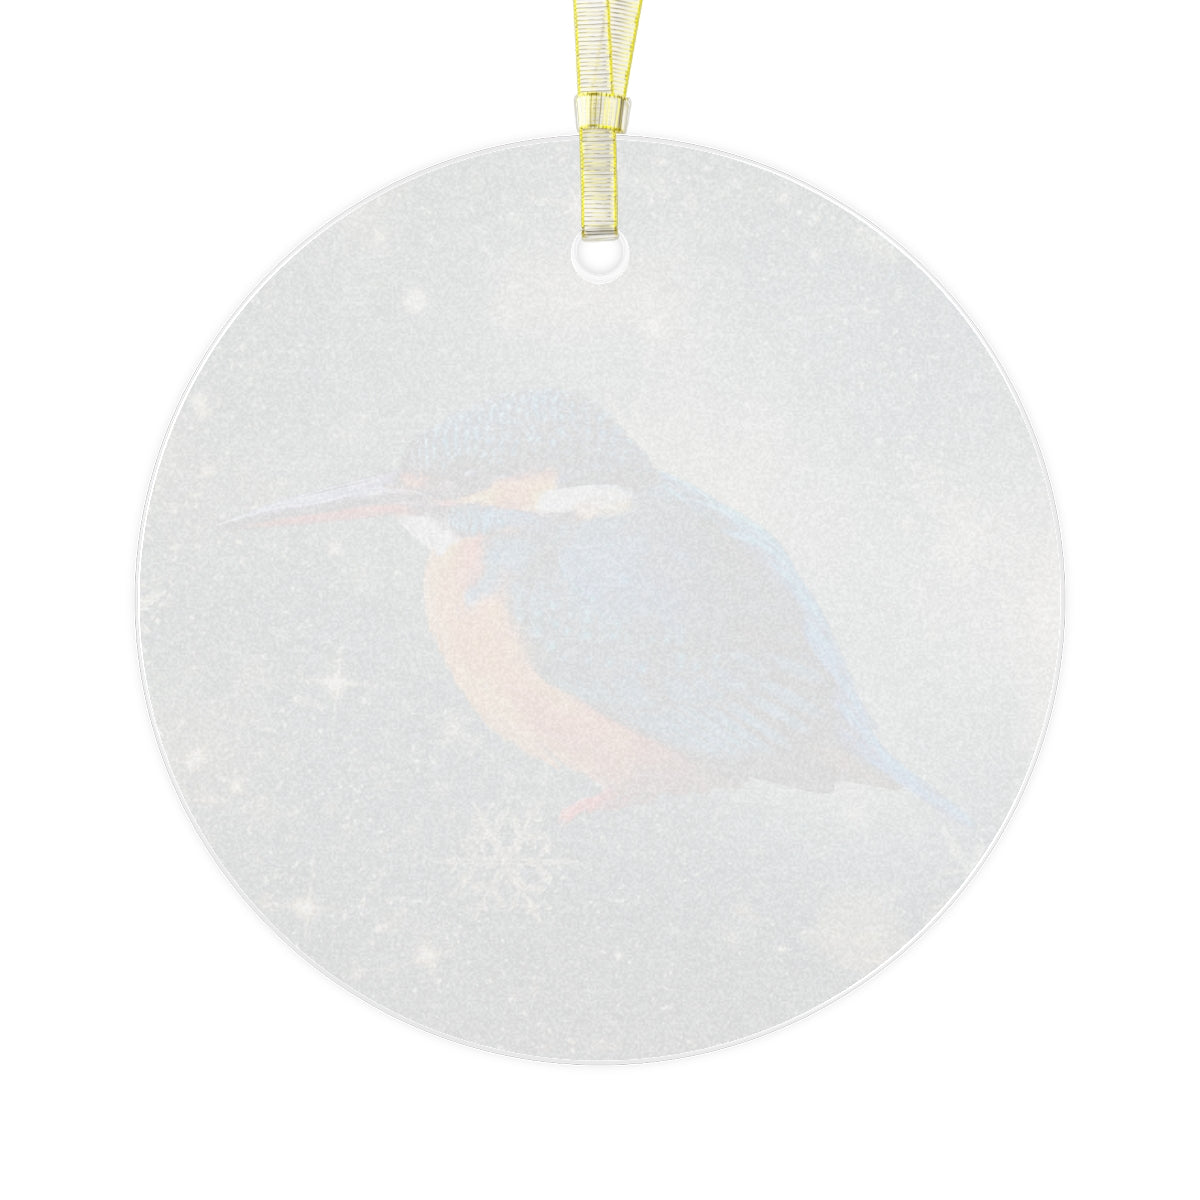 Chatty Common Kingfisher Luxurious Christmas Glass Ornament